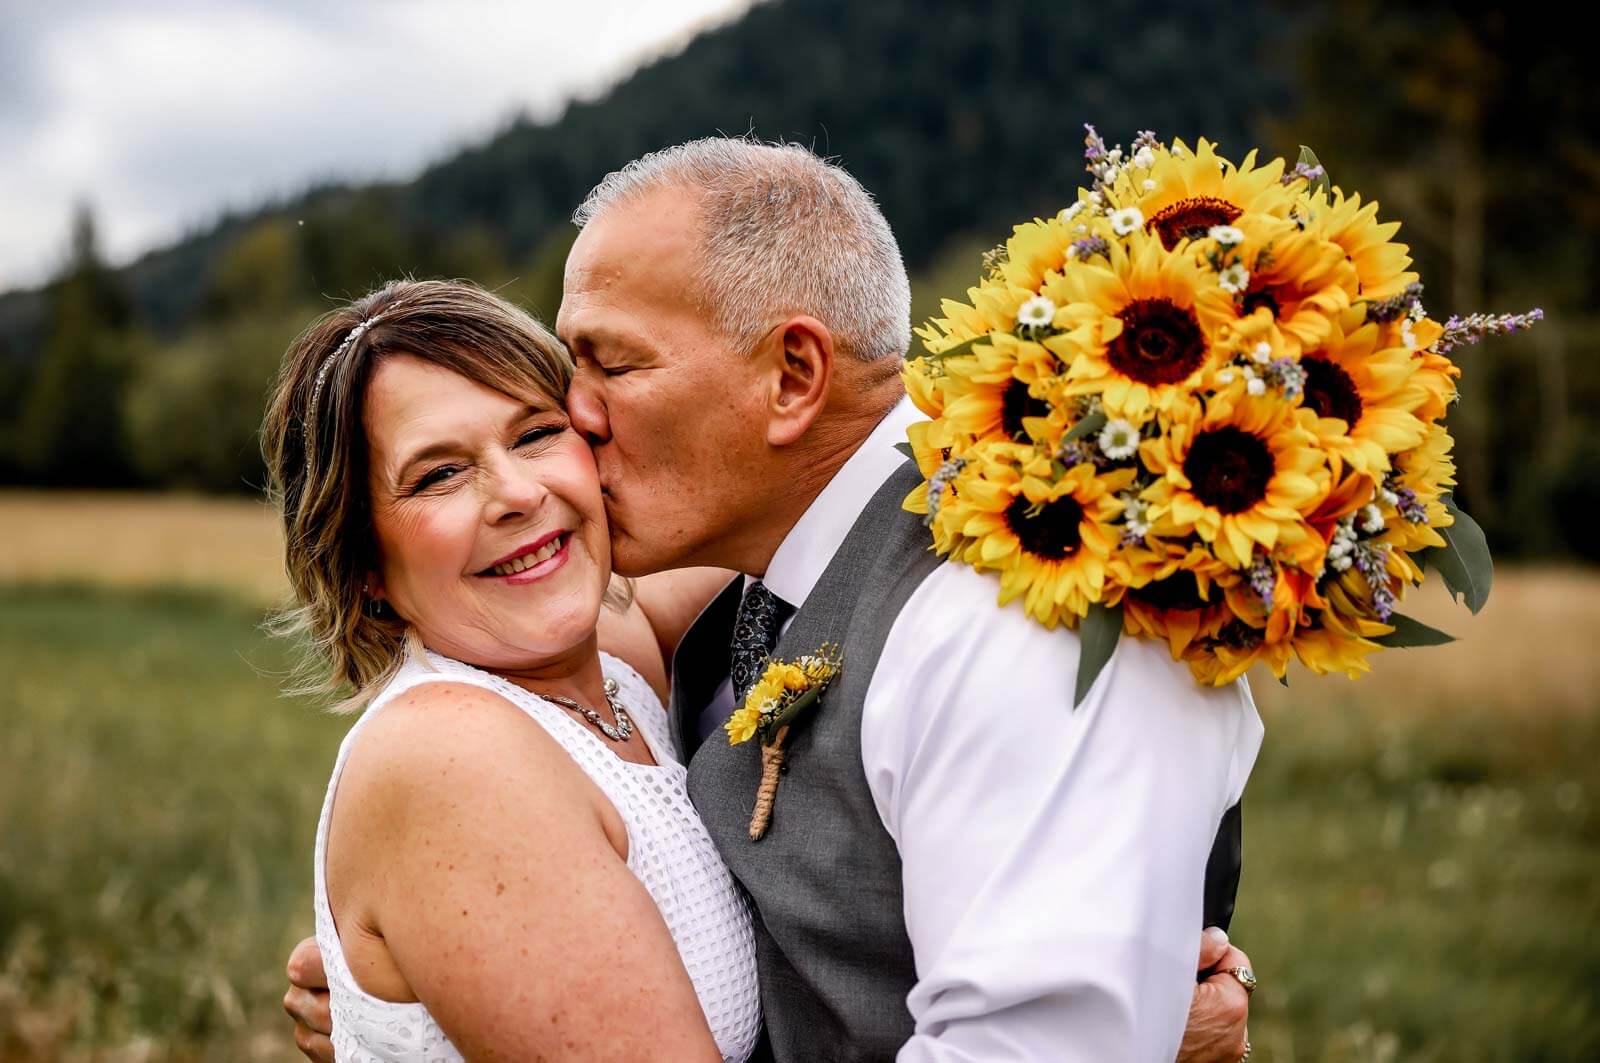 Bride and groom kiss with sunflower bouquet